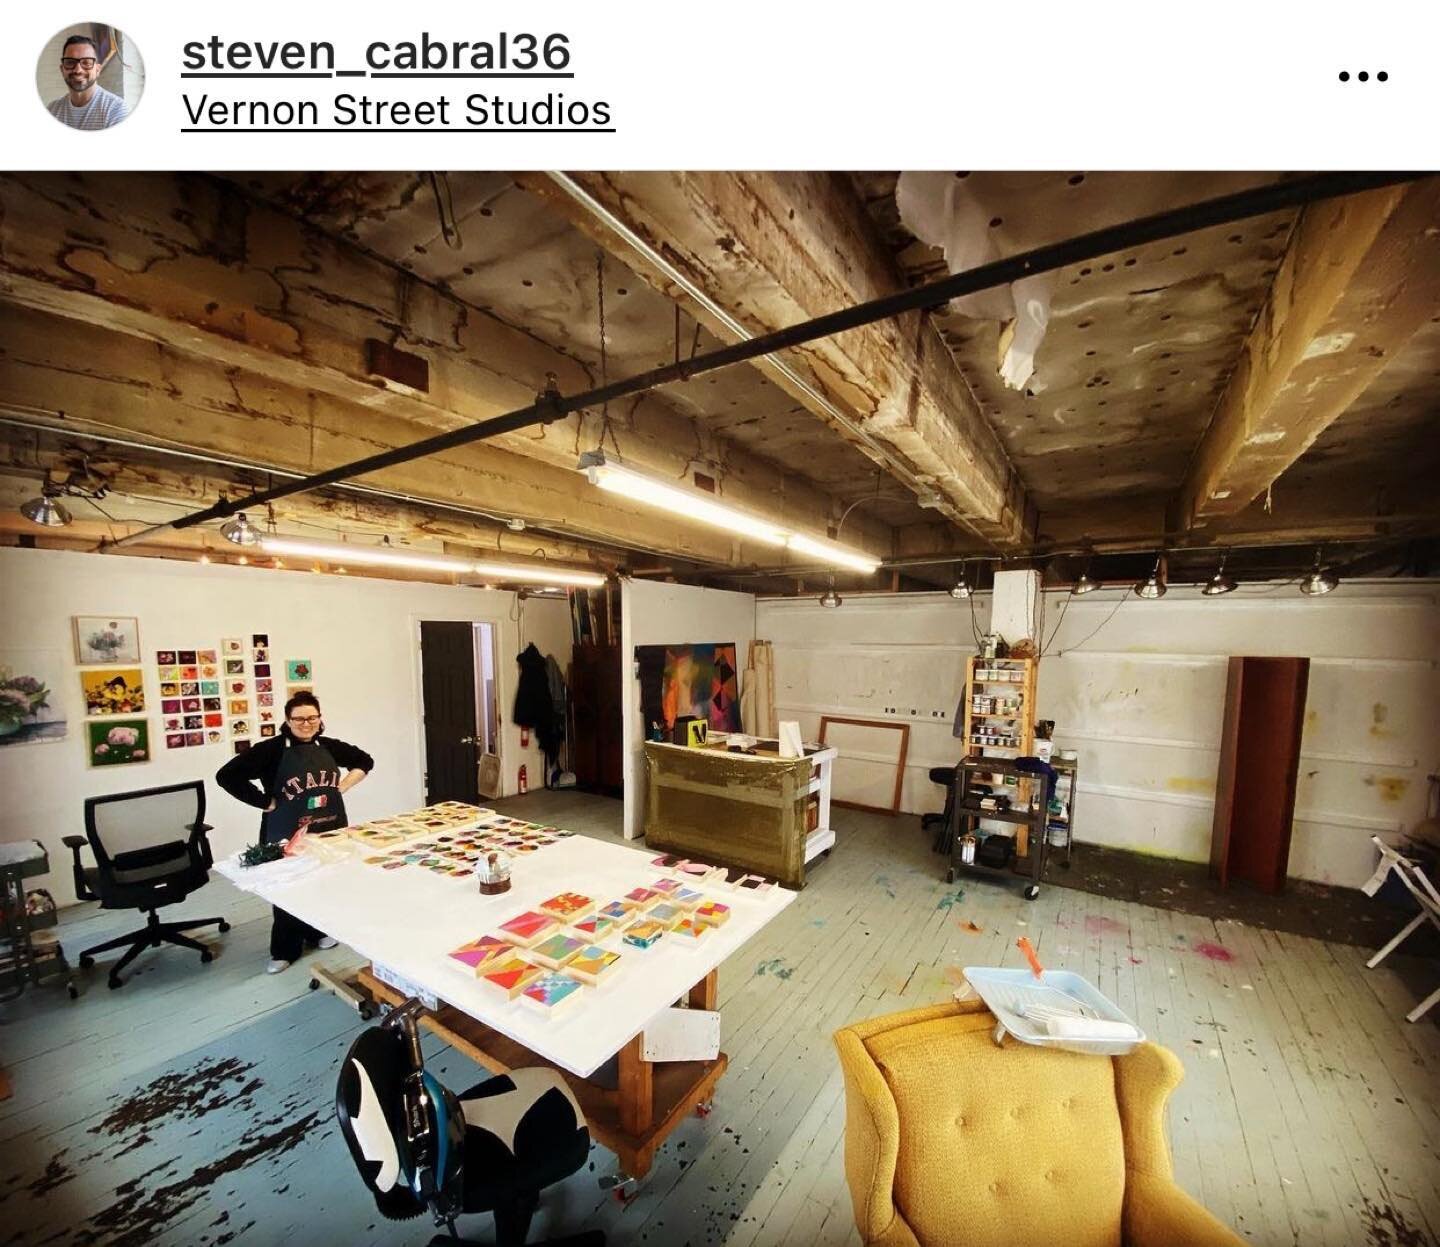 #repost Steven and I spent the weekend getting our studio ready for next week&rsquo;s Somerville Open Studios. Come check us out at Vernon Street Studios, studio #103 on the first floor. #44 on the map. We have lots of new work!

#art #artist #artist